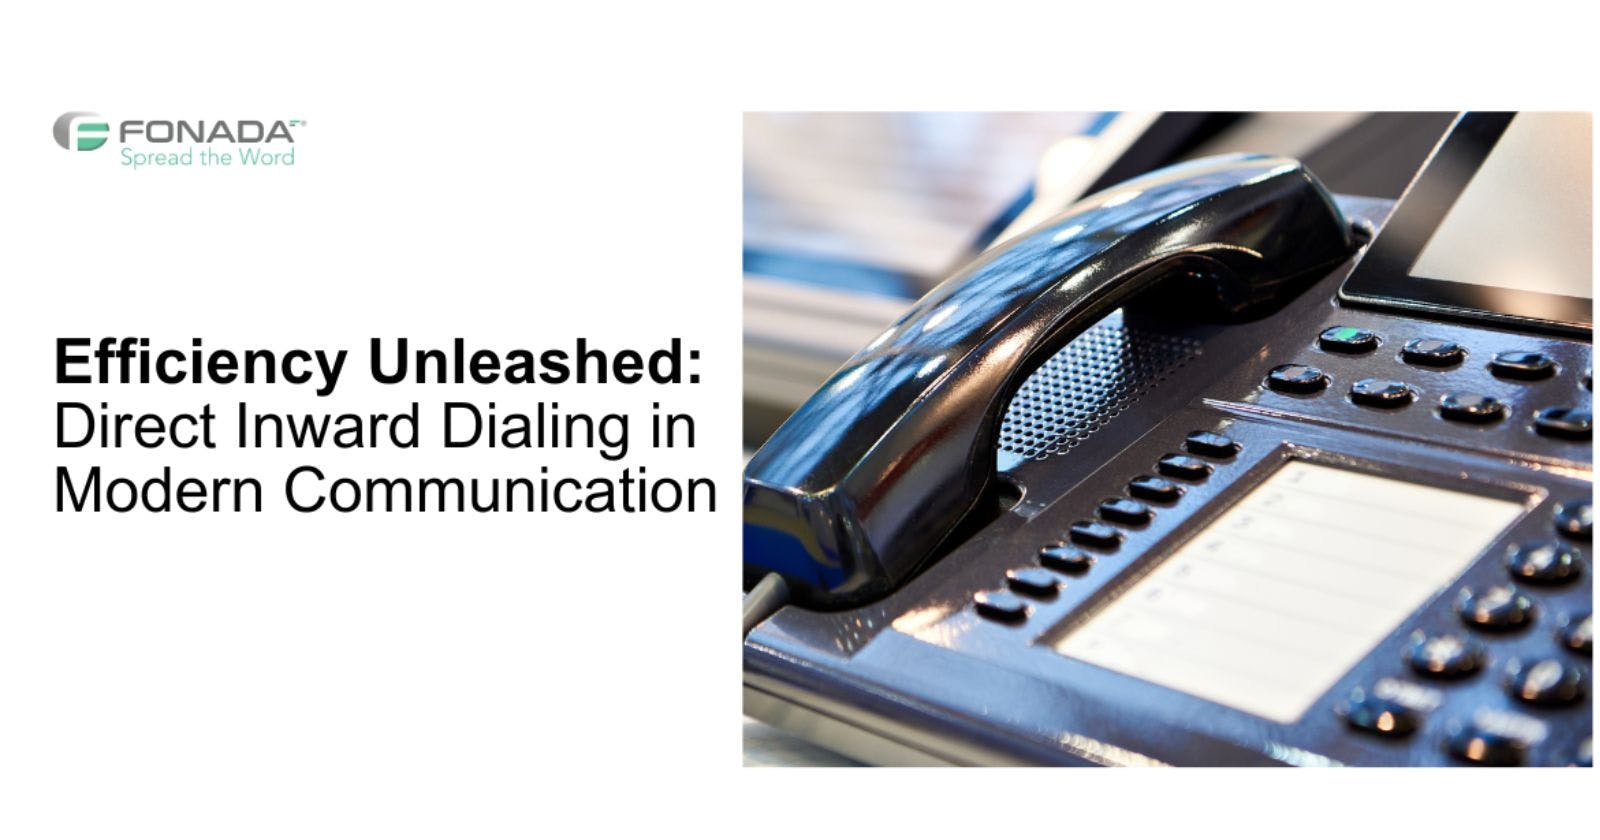 Efficiency Unleashed: Direct Inward Dialing in Modern Communication